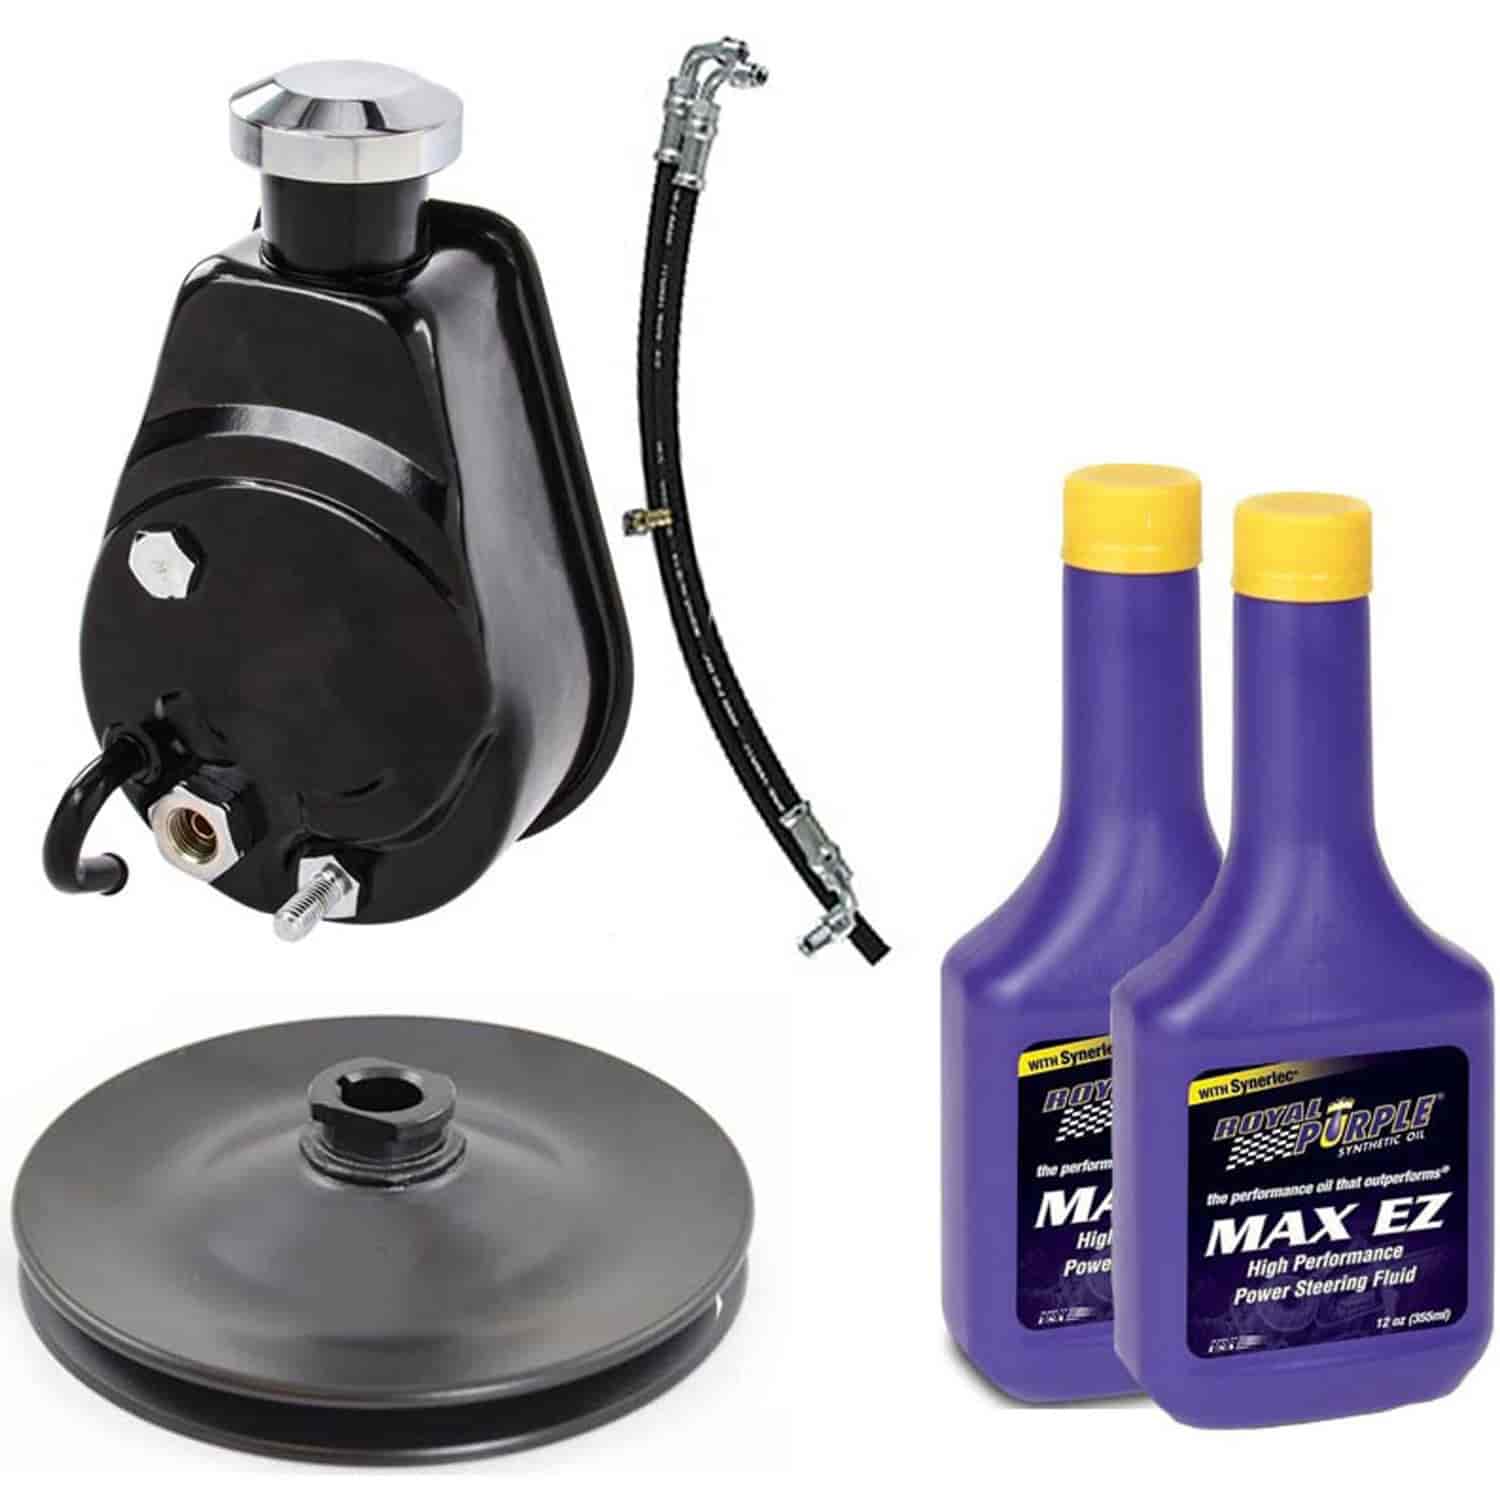 Saginaw-Style Power Steering Pump Kit for 1966-1976 GM